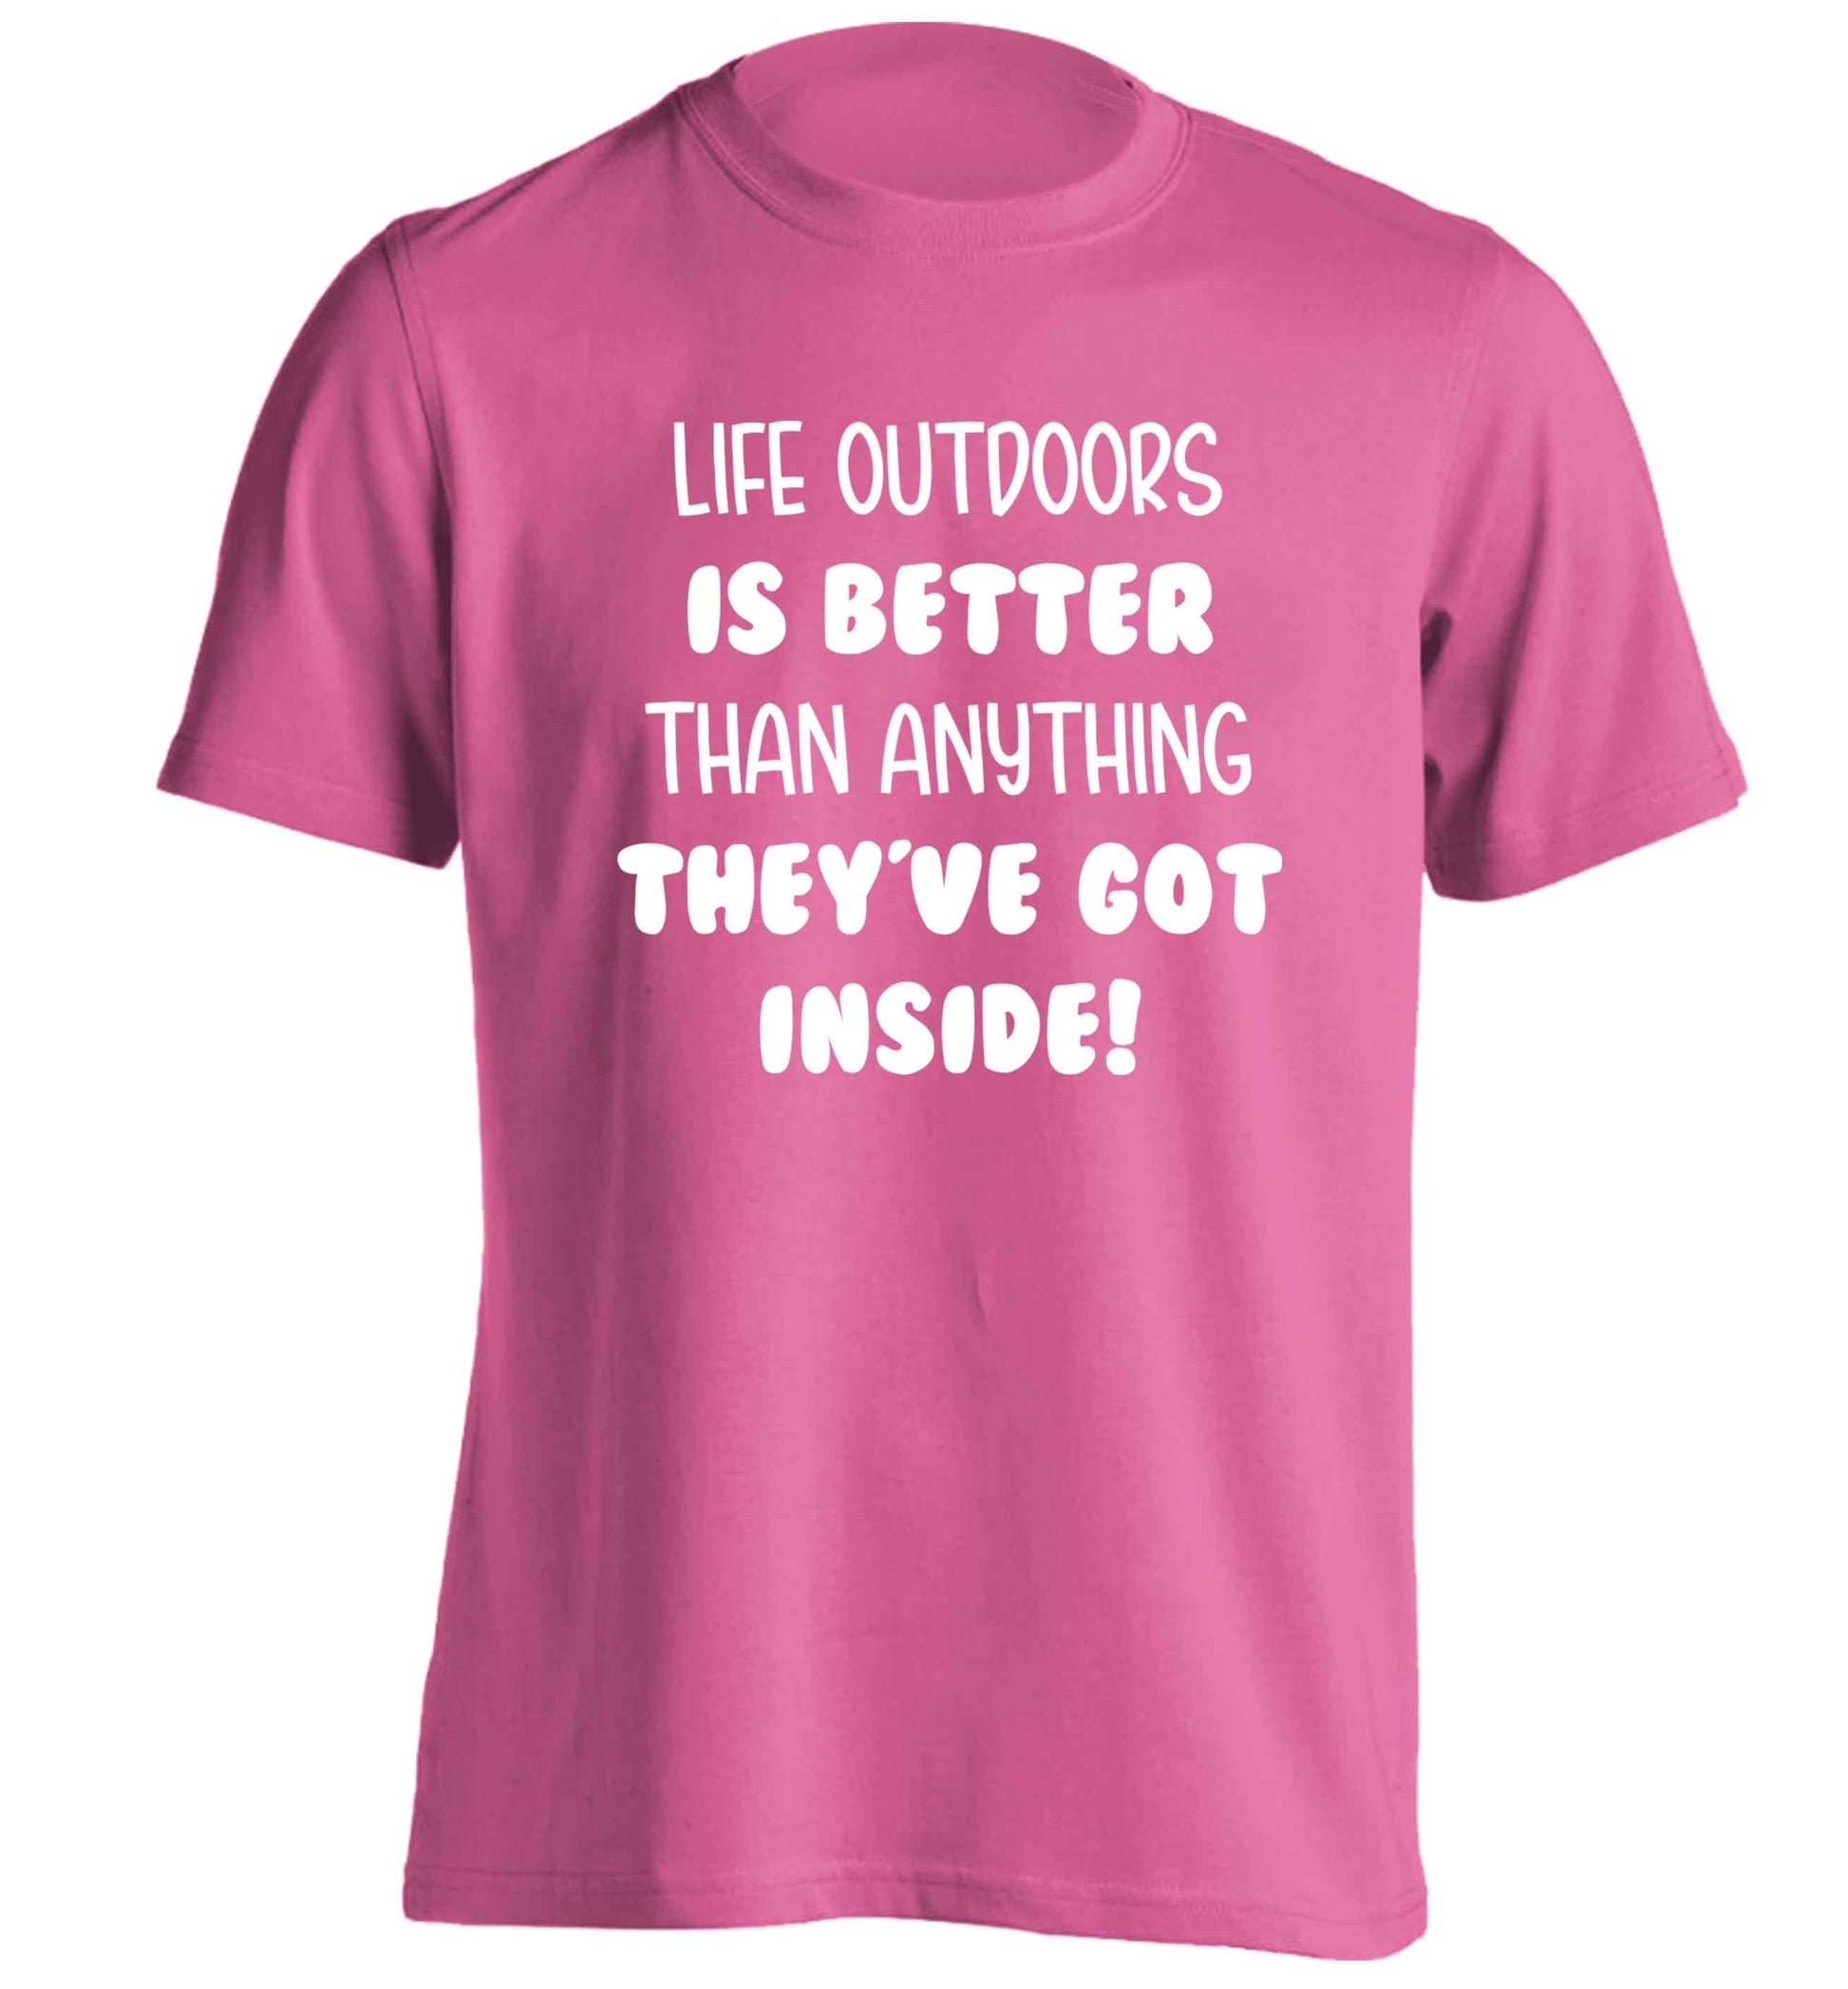 Life outdoors is better than anything they've go inside adults unisex pink Tshirt 2XL